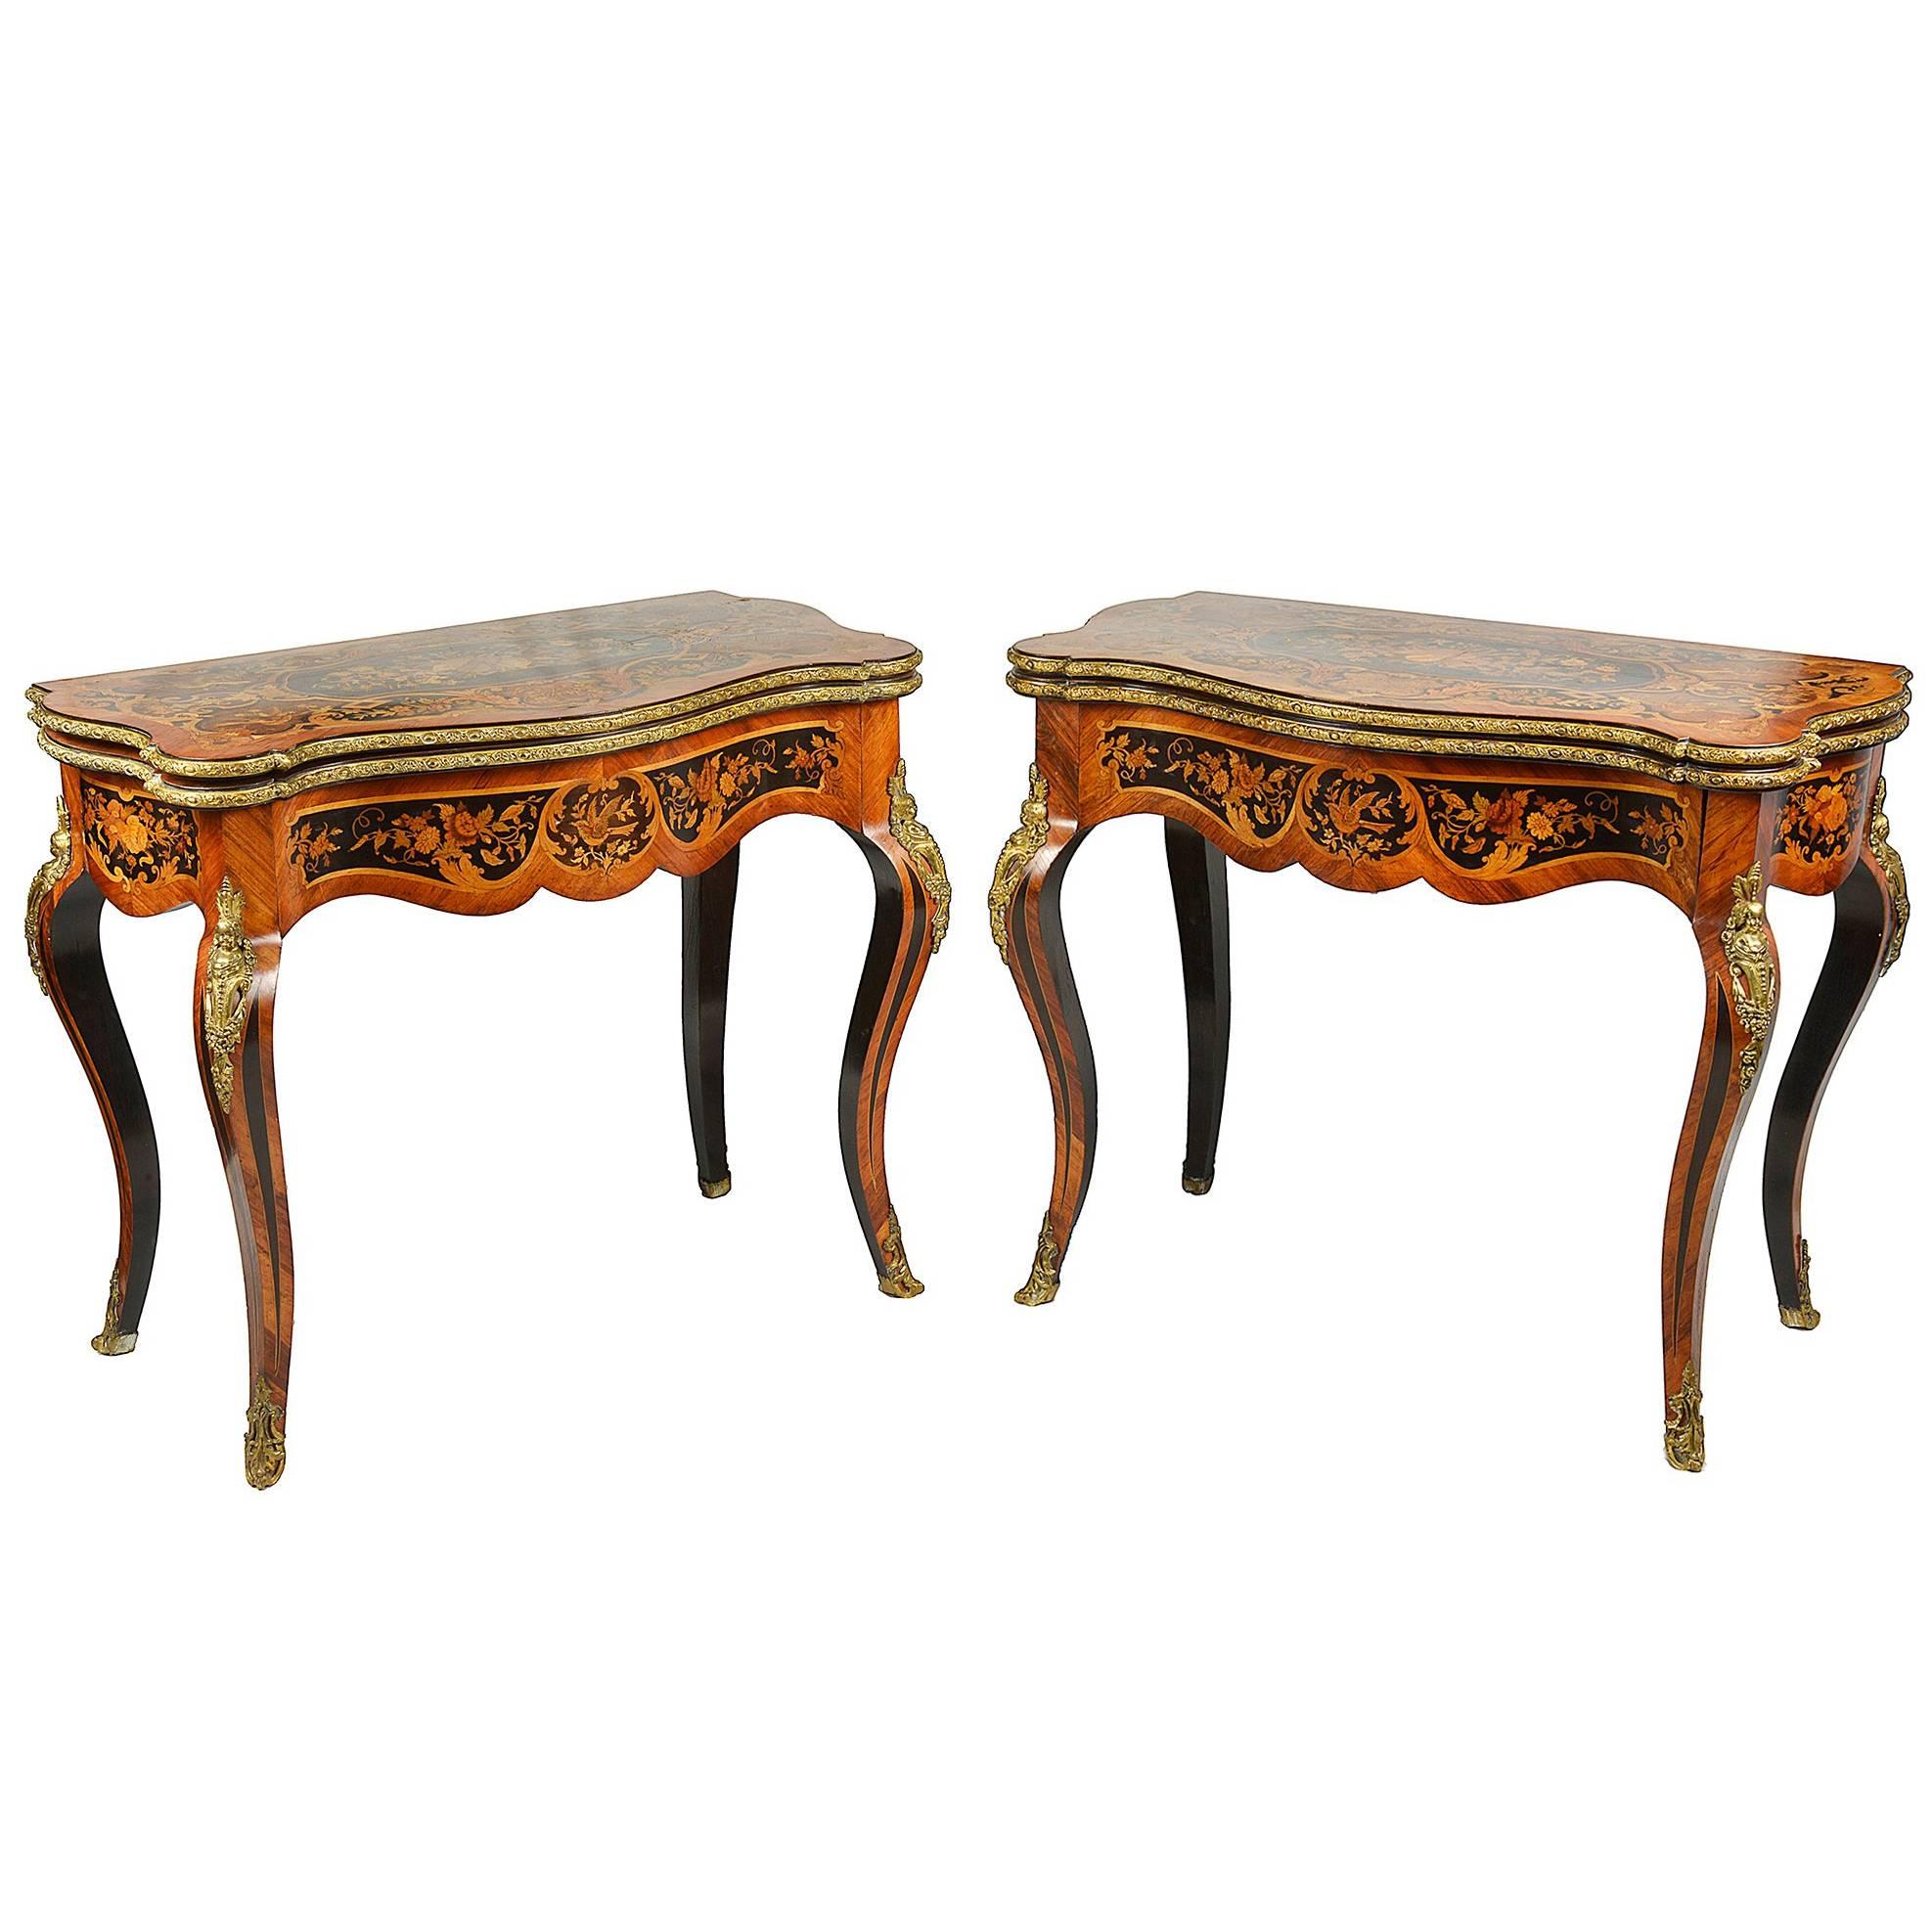 Pair of Louis XVI Style Marquetry Card Tables, 19th Century For Sale